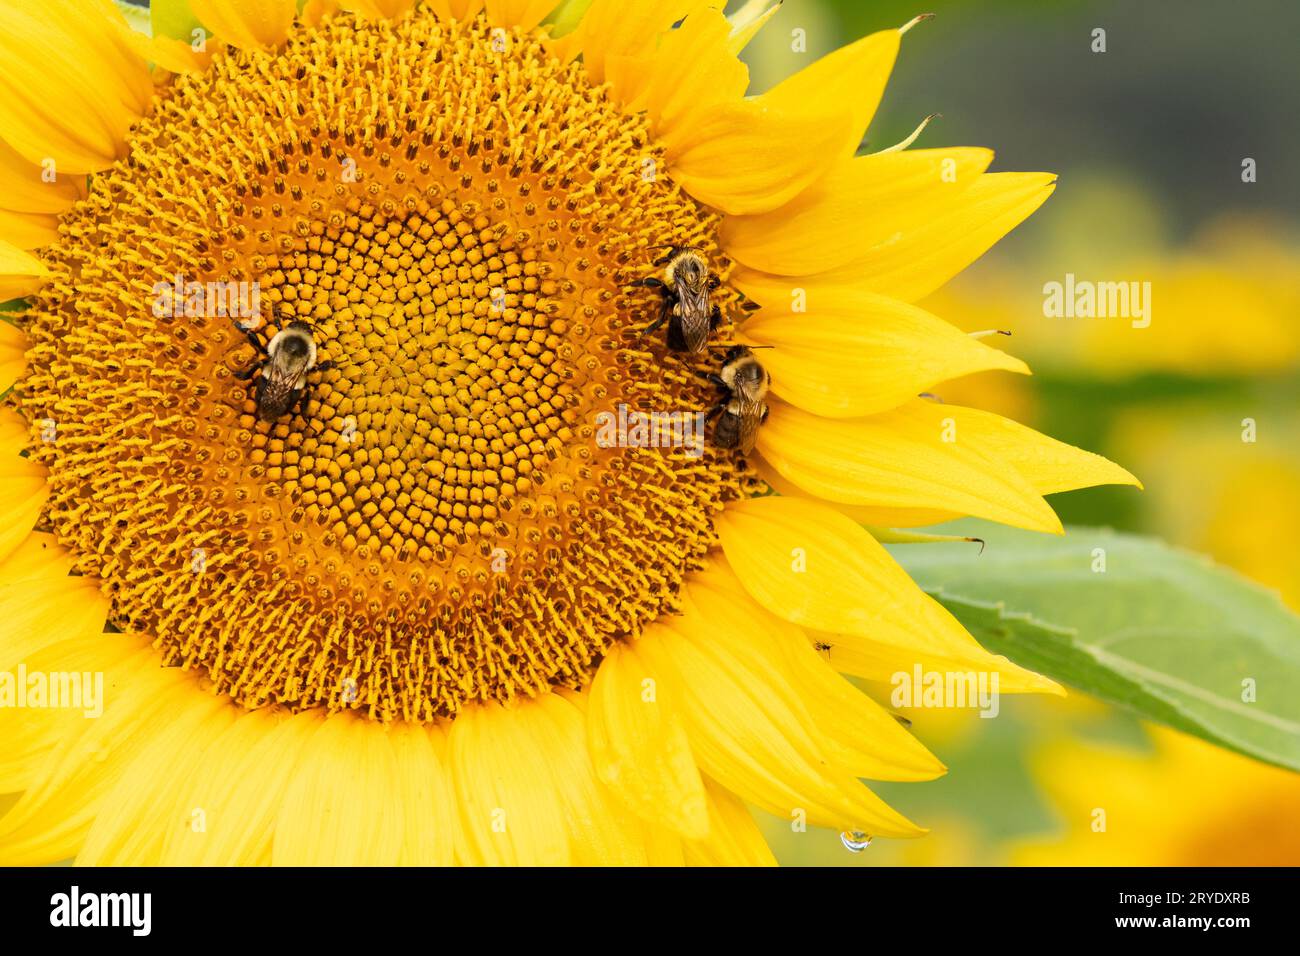 Three bees pollinate the face of a bright yellow sunflower in summer; macro image Stock Photo